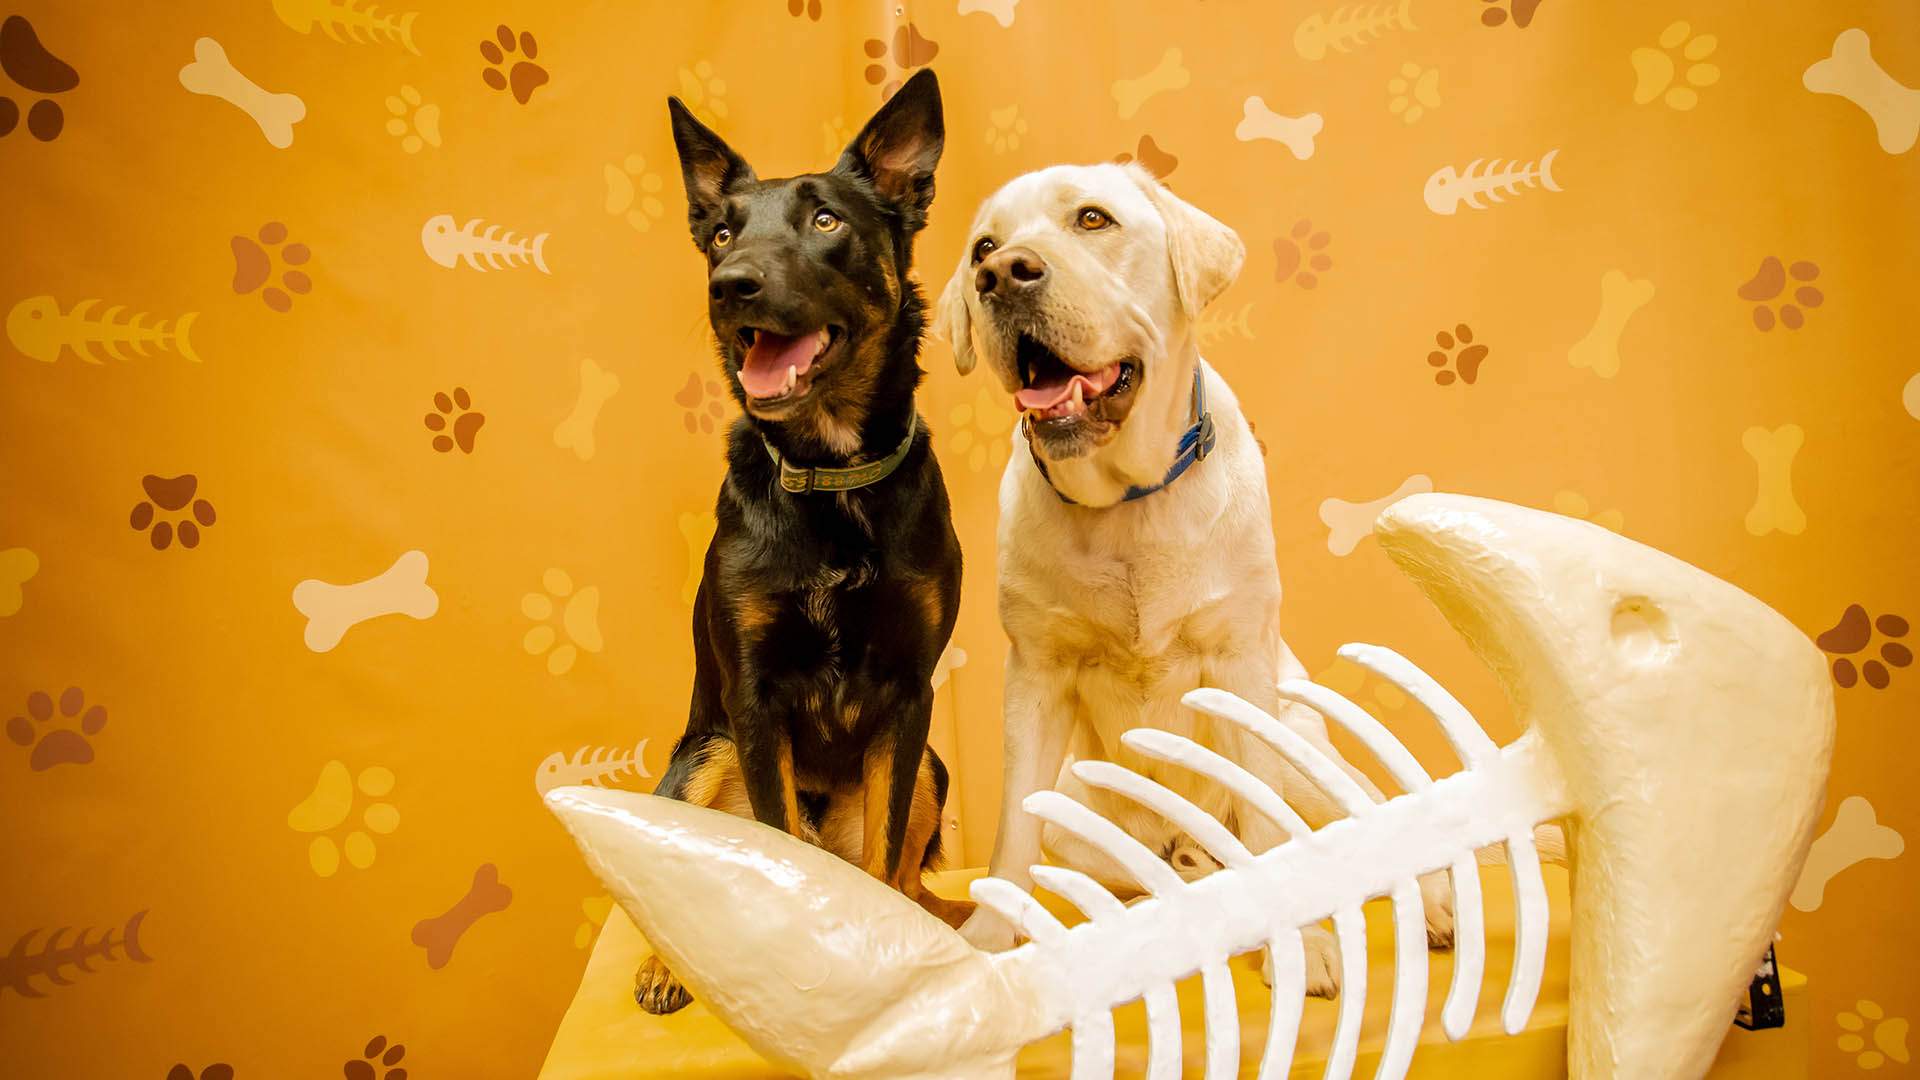 An Extremely Photogenic Pop-Up 'Museum' for Pets Is Coming to Australia